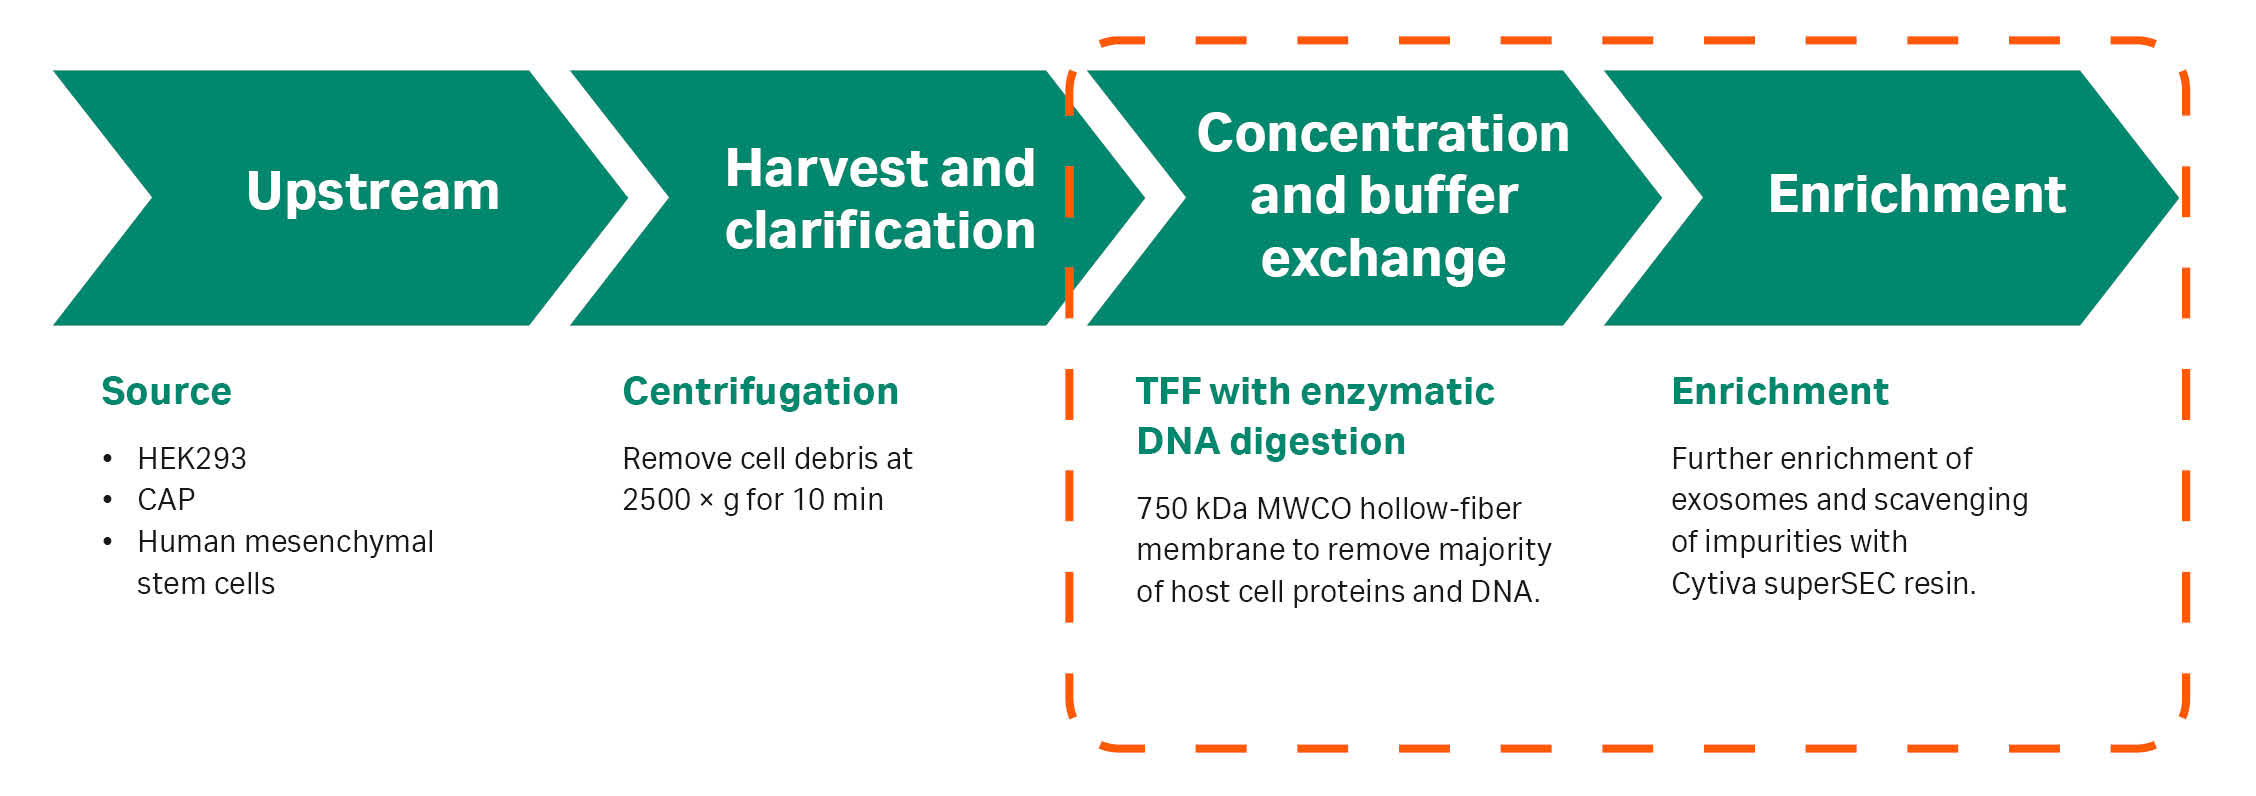 Exosome isolation by tangential flow filtration and size exclusion chromatography